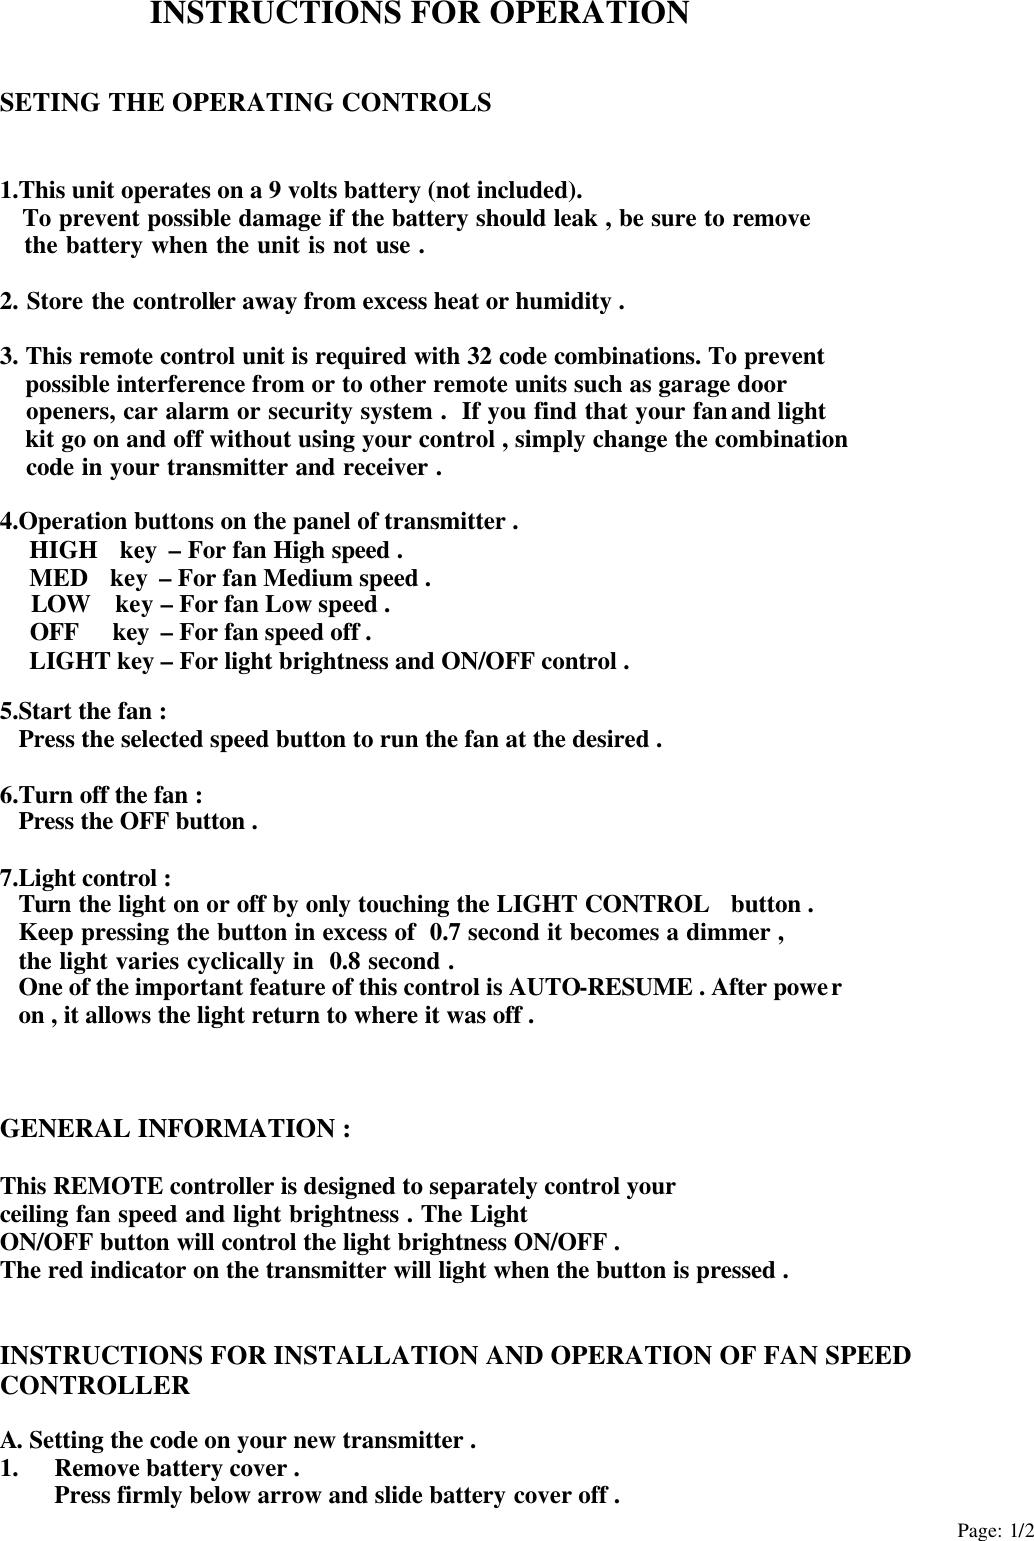 Page: 1/2 INSTRUCTIONS FOR OPERATION   SETING THE OPERATING CONTROLS   1.This unit operates on a 9 volts battery (not included).    To prevent possible damage if the battery should leak , be sure to remove    the battery when the unit is not use .  2. Store the controller away from excess heat or humidity .  3. This remote control unit is required with 32 code combinations. To prevent  possible interference from or to other remote units such as garage door  openers, car alarm or security system .  If you find that your fan and light    kit go on and off without using your control , simply change the combination  code in your transmitter and receiver .  4.Operation buttons on the panel of transmitter .  HIGH  key – For fan High speed .  MED  key – For fan Medium speed .  LOW  key – For fan Low speed .  OFF   key – For fan speed off . LIGHT key – For light brightness and ON/OFF control .  5.Start the fan : Press the selected speed button to run the fan at the desired .  6.Turn off the fan : Press the OFF button .  7.Light control : Turn the light on or off by only touching the LIGHT CONTROL  button . Keep pressing the button in excess of  0.7 second it becomes a dimmer , the light varies cyclically in  0.8 second . One of the important feature of this control is AUTO-RESUME . After power   on , it allows the light return to where it was off .    GENERAL INFORMATION :  This REMOTE controller is designed to separately control your   ceiling fan speed and light brightness . The Light   ON/OFF button will control the light brightness ON/OFF . The red indicator on the transmitter will light when the button is pressed .   INSTRUCTIONS FOR INSTALLATION AND OPERATION OF FAN SPEED CONTROLLER  A. Setting the code on your new transmitter . 1. Remove battery cover . Press firmly below arrow and slide battery cover off . 